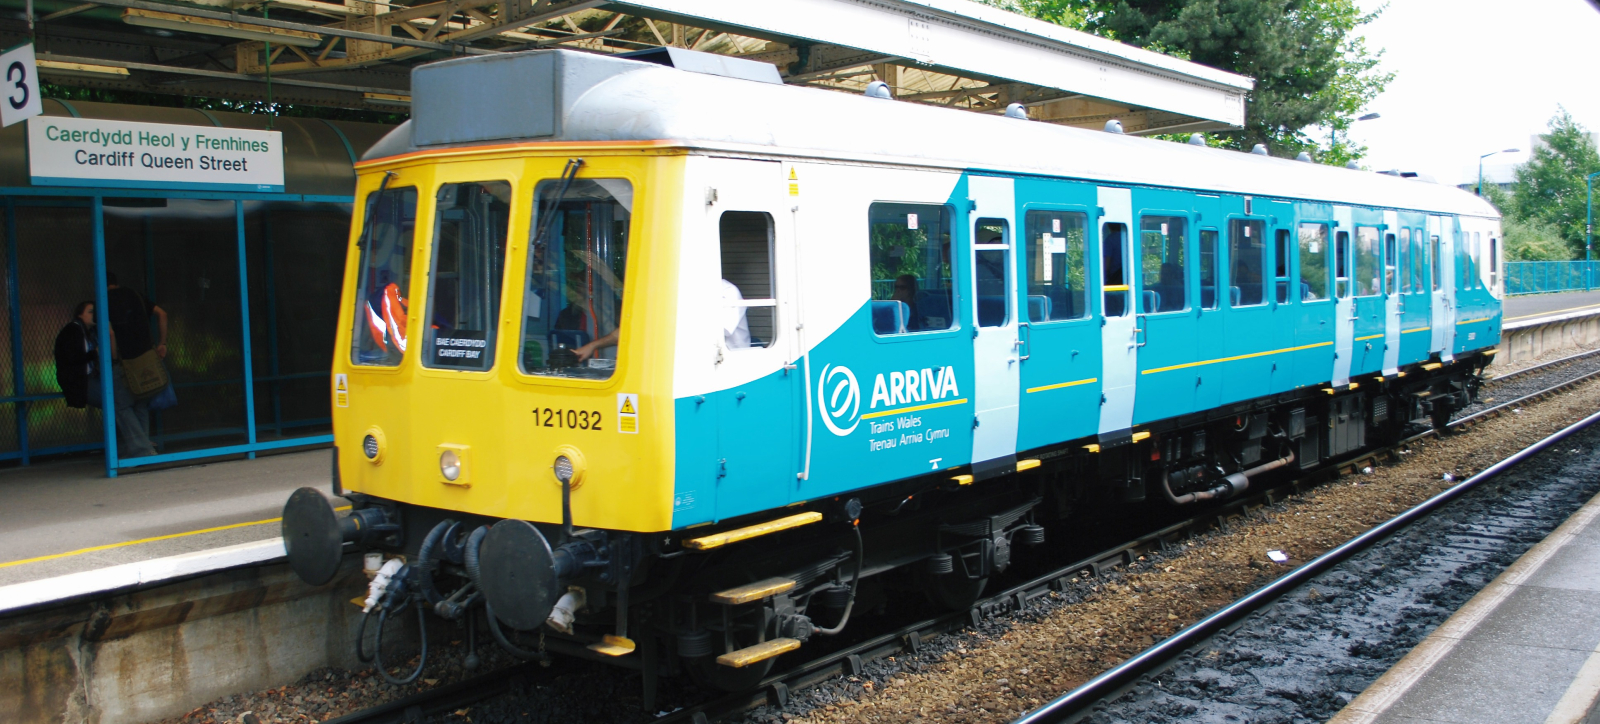 121032 “Bubble Car” operated by Arriva Trains Wales in June 2019 at Cardiff Queen Street